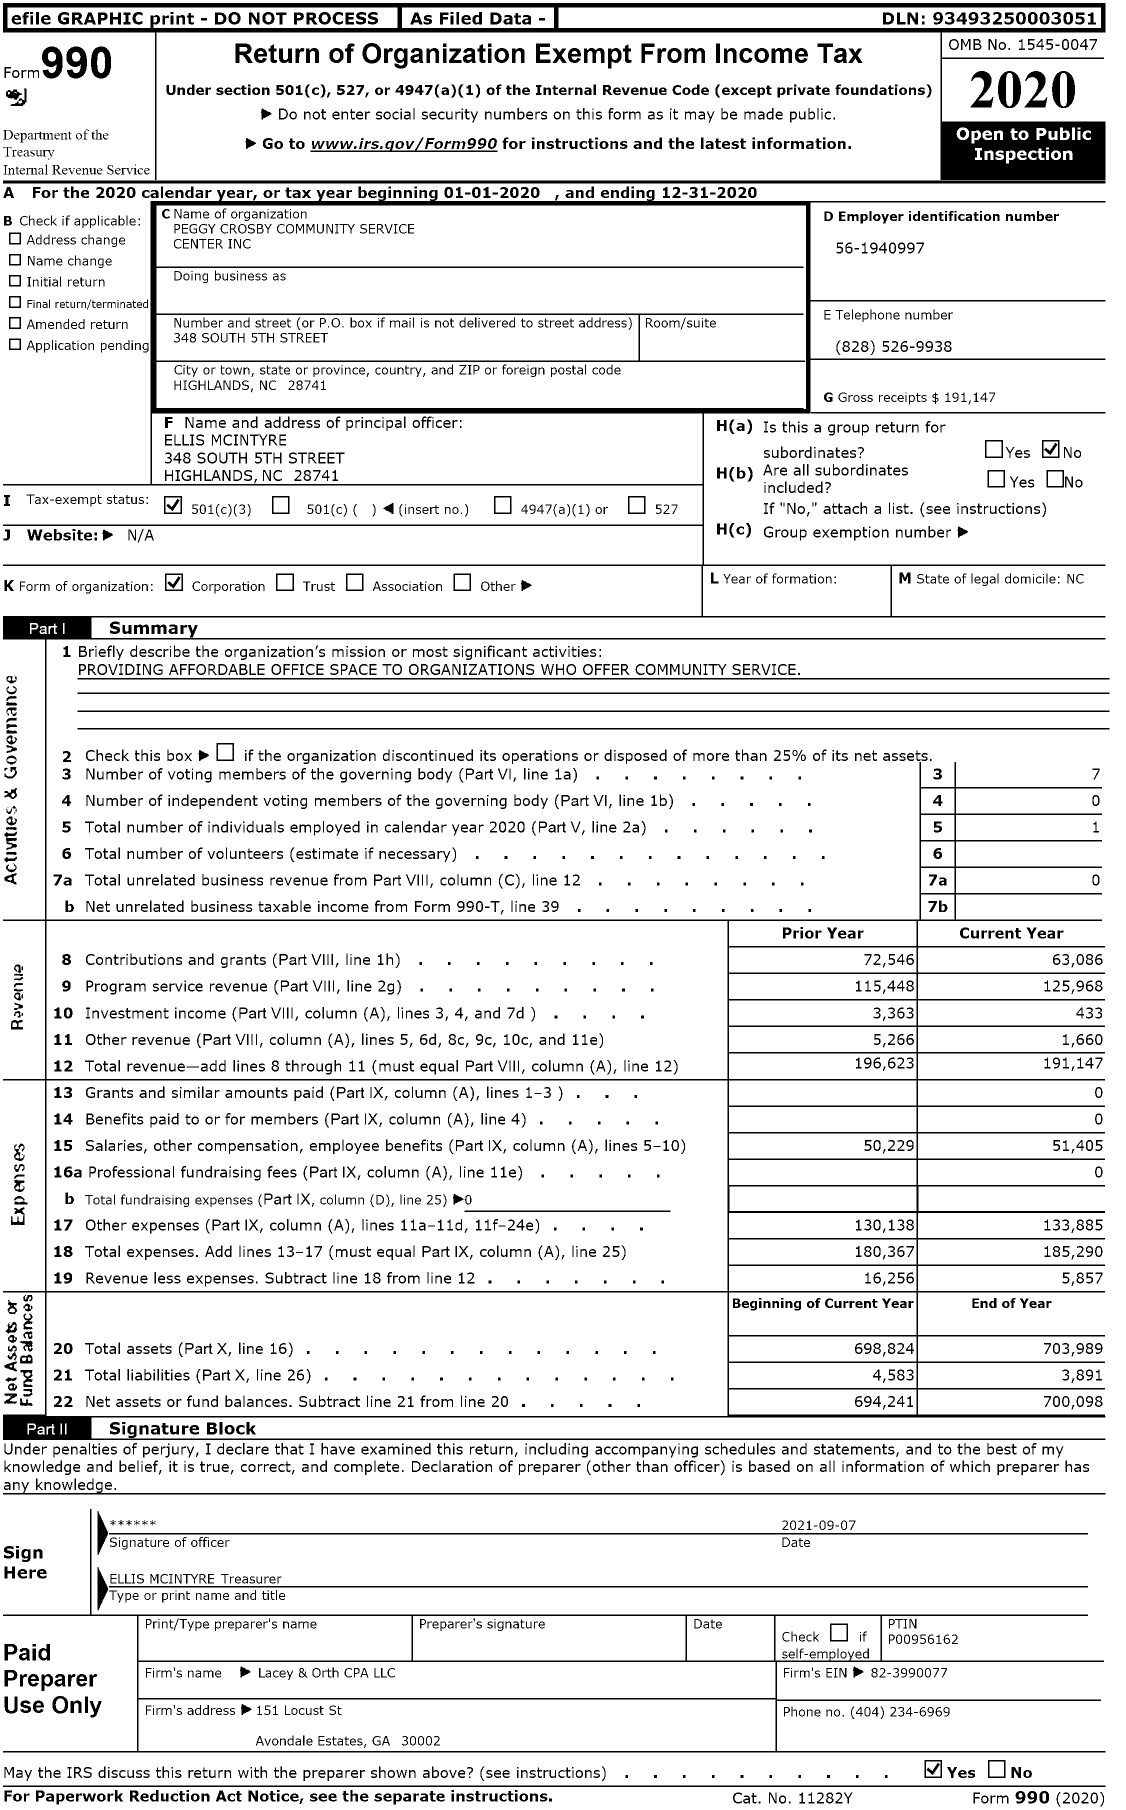 Image of first page of 2020 Form 990 for Peggy Crosby Community Service Center